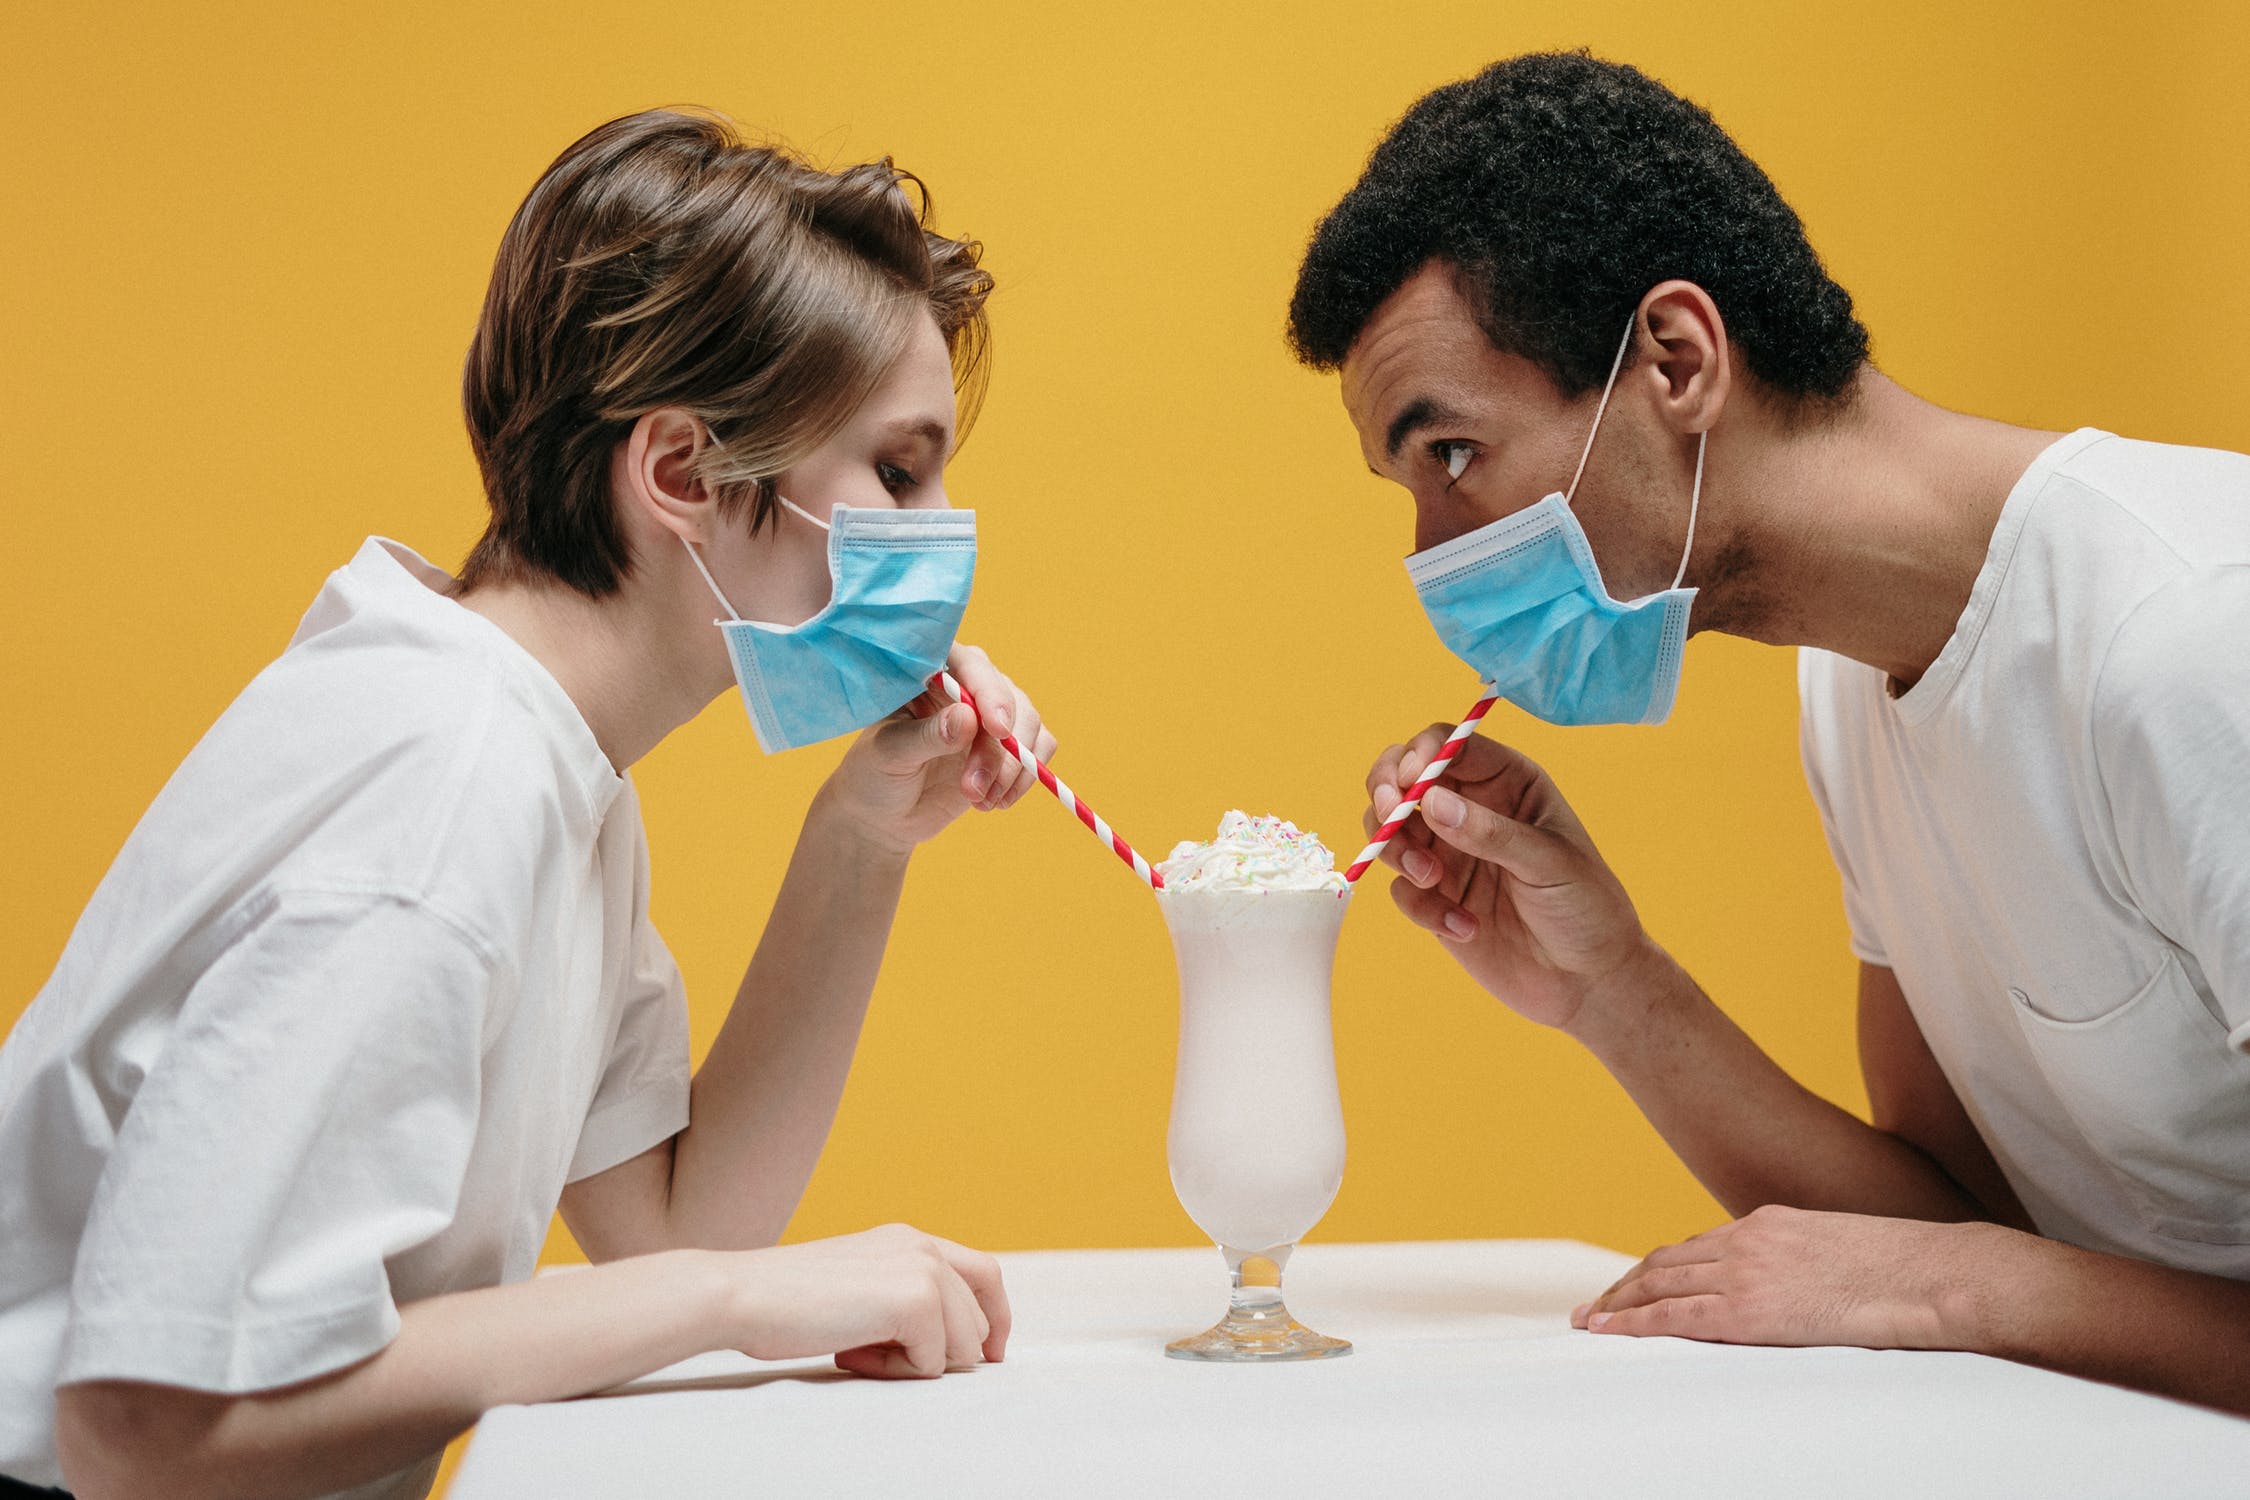 mixed race couple drinking from the same glass while wearing PPE masks against a yellow background